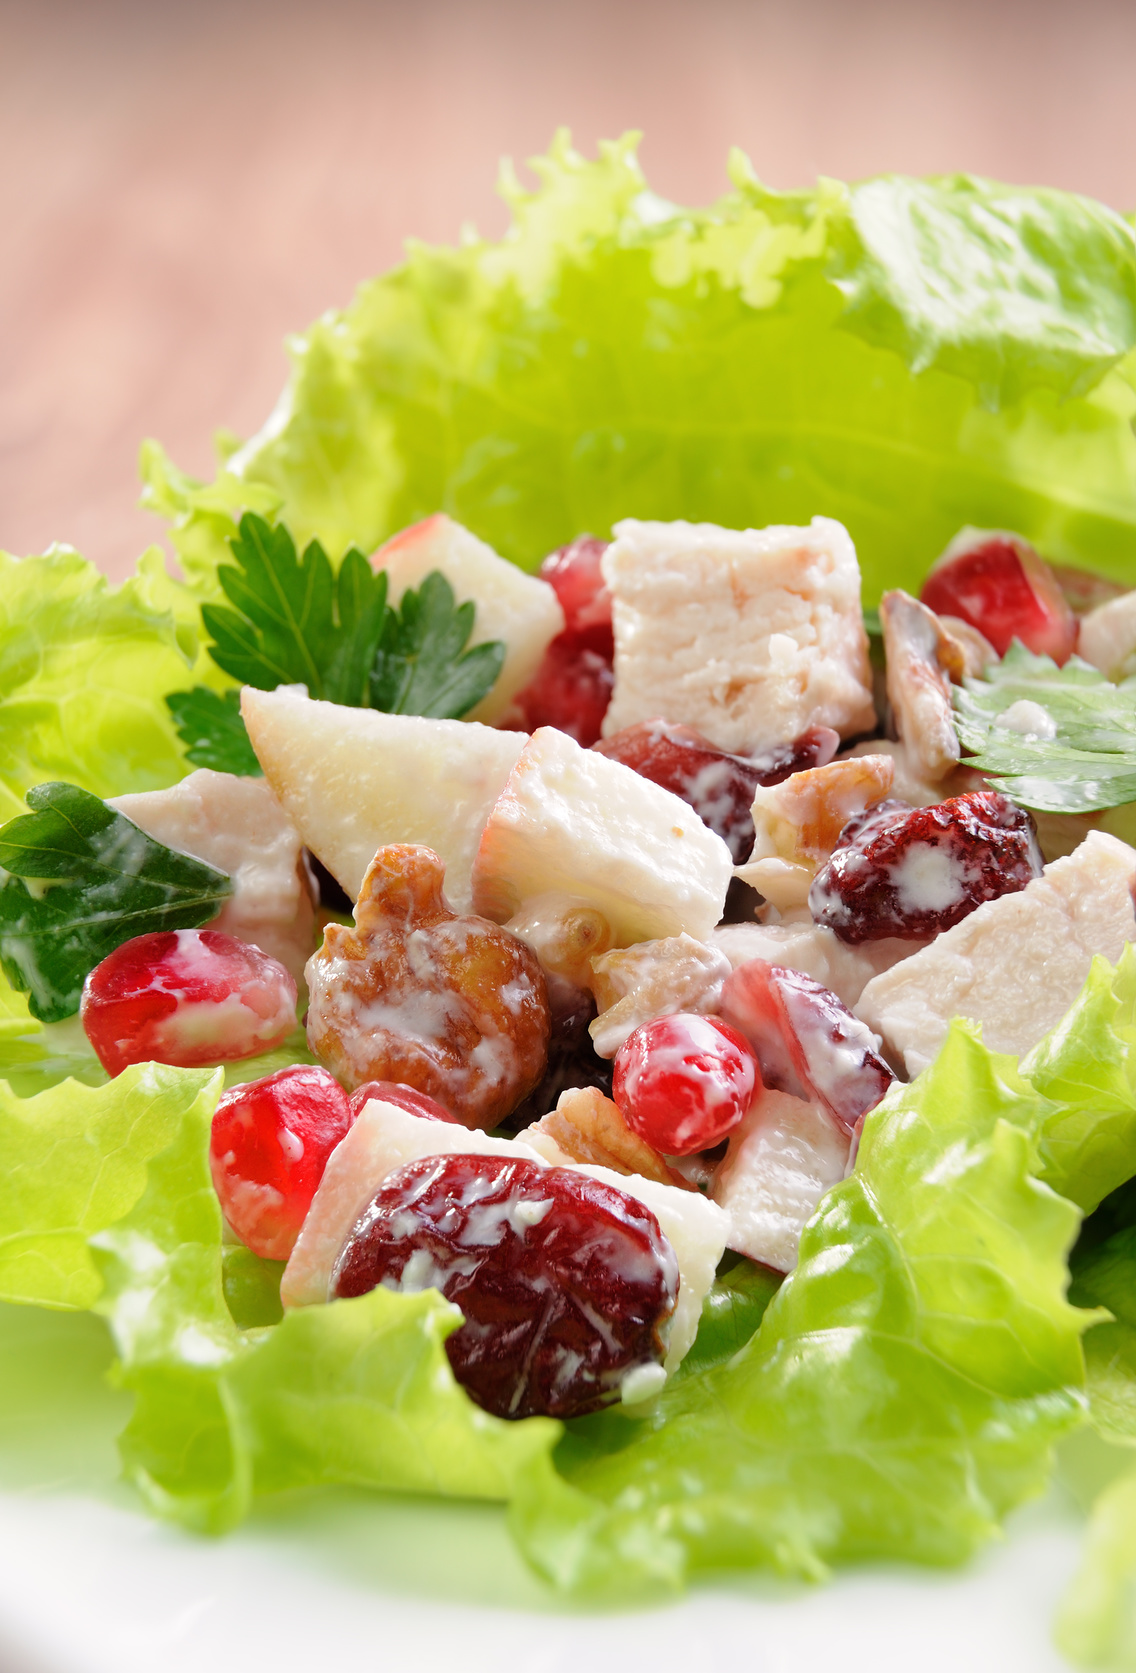 Cranberry Chicken Salad for Protein and Fiber - Get RIPPED!® by Jari Love